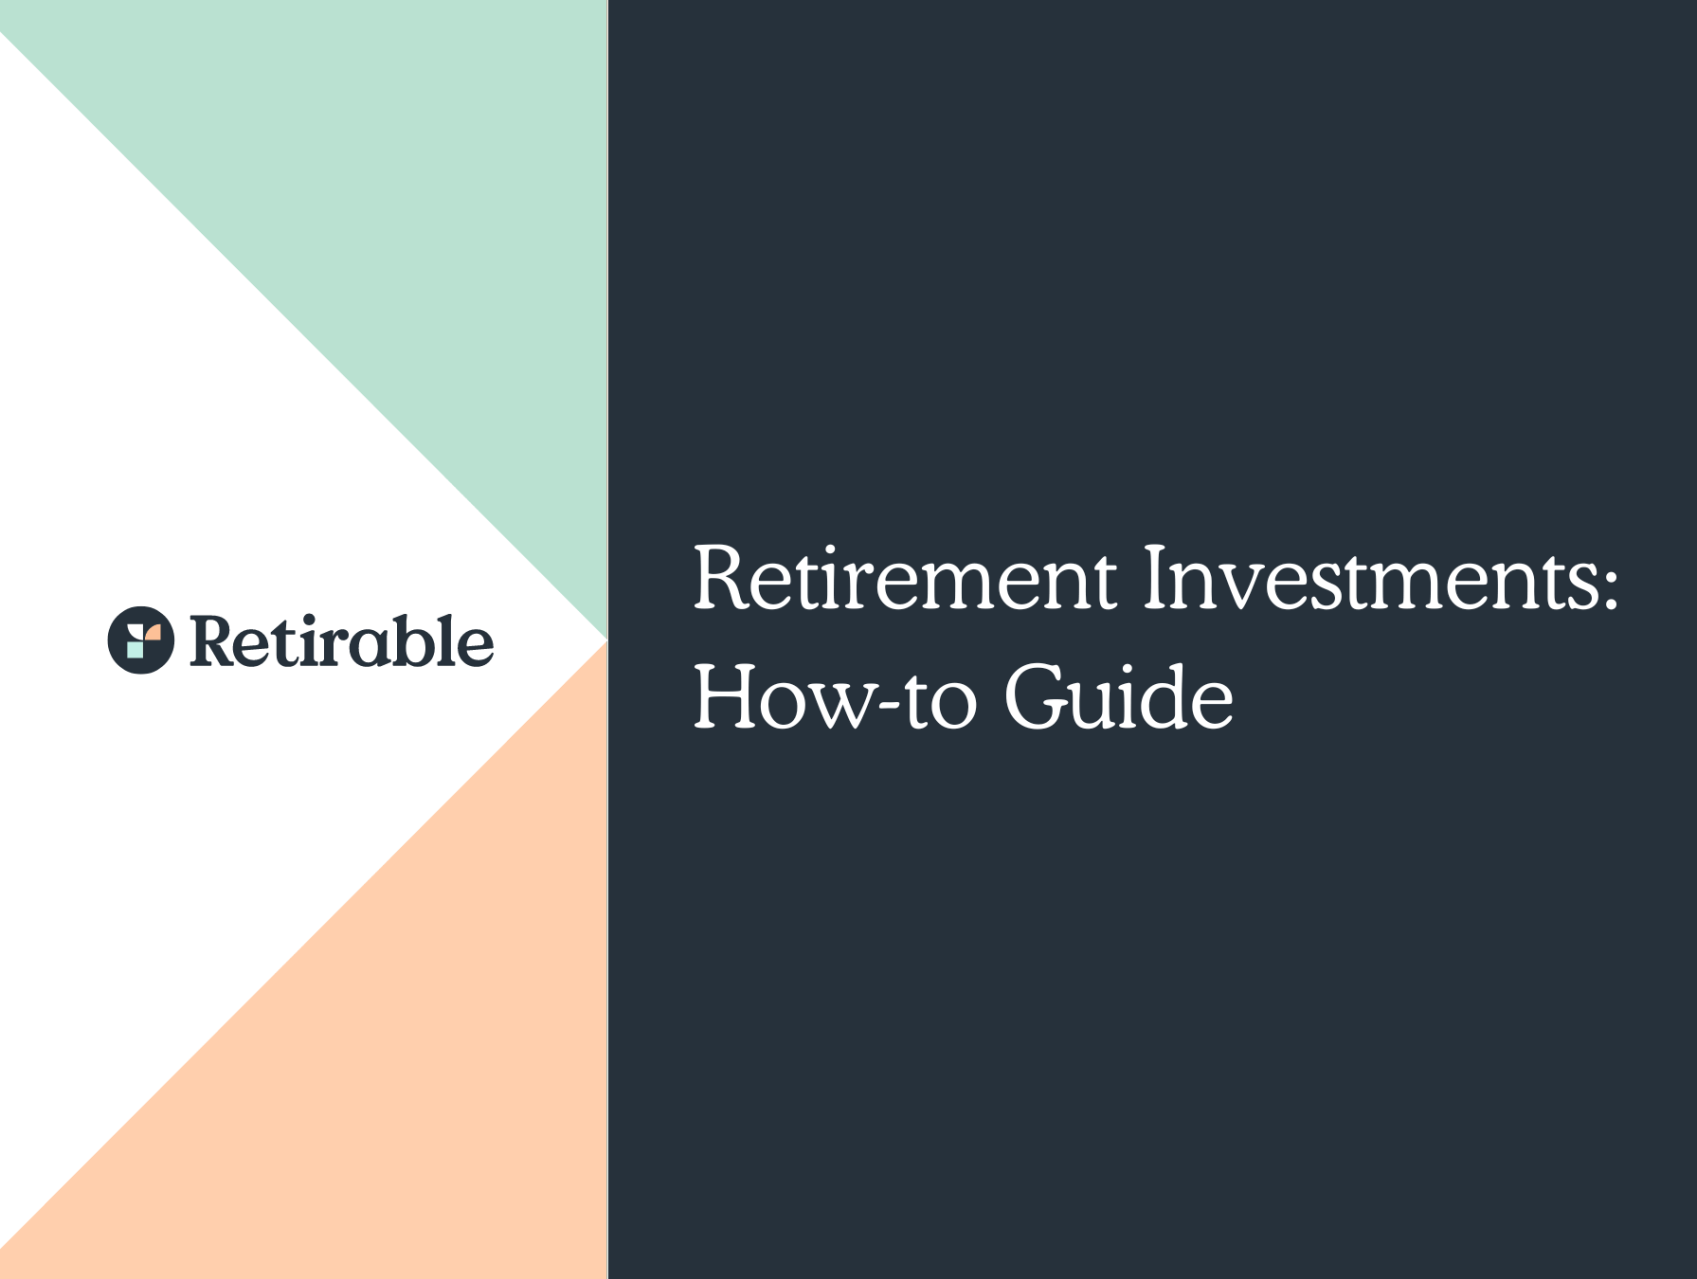 Retirement Investments: How-to Guide